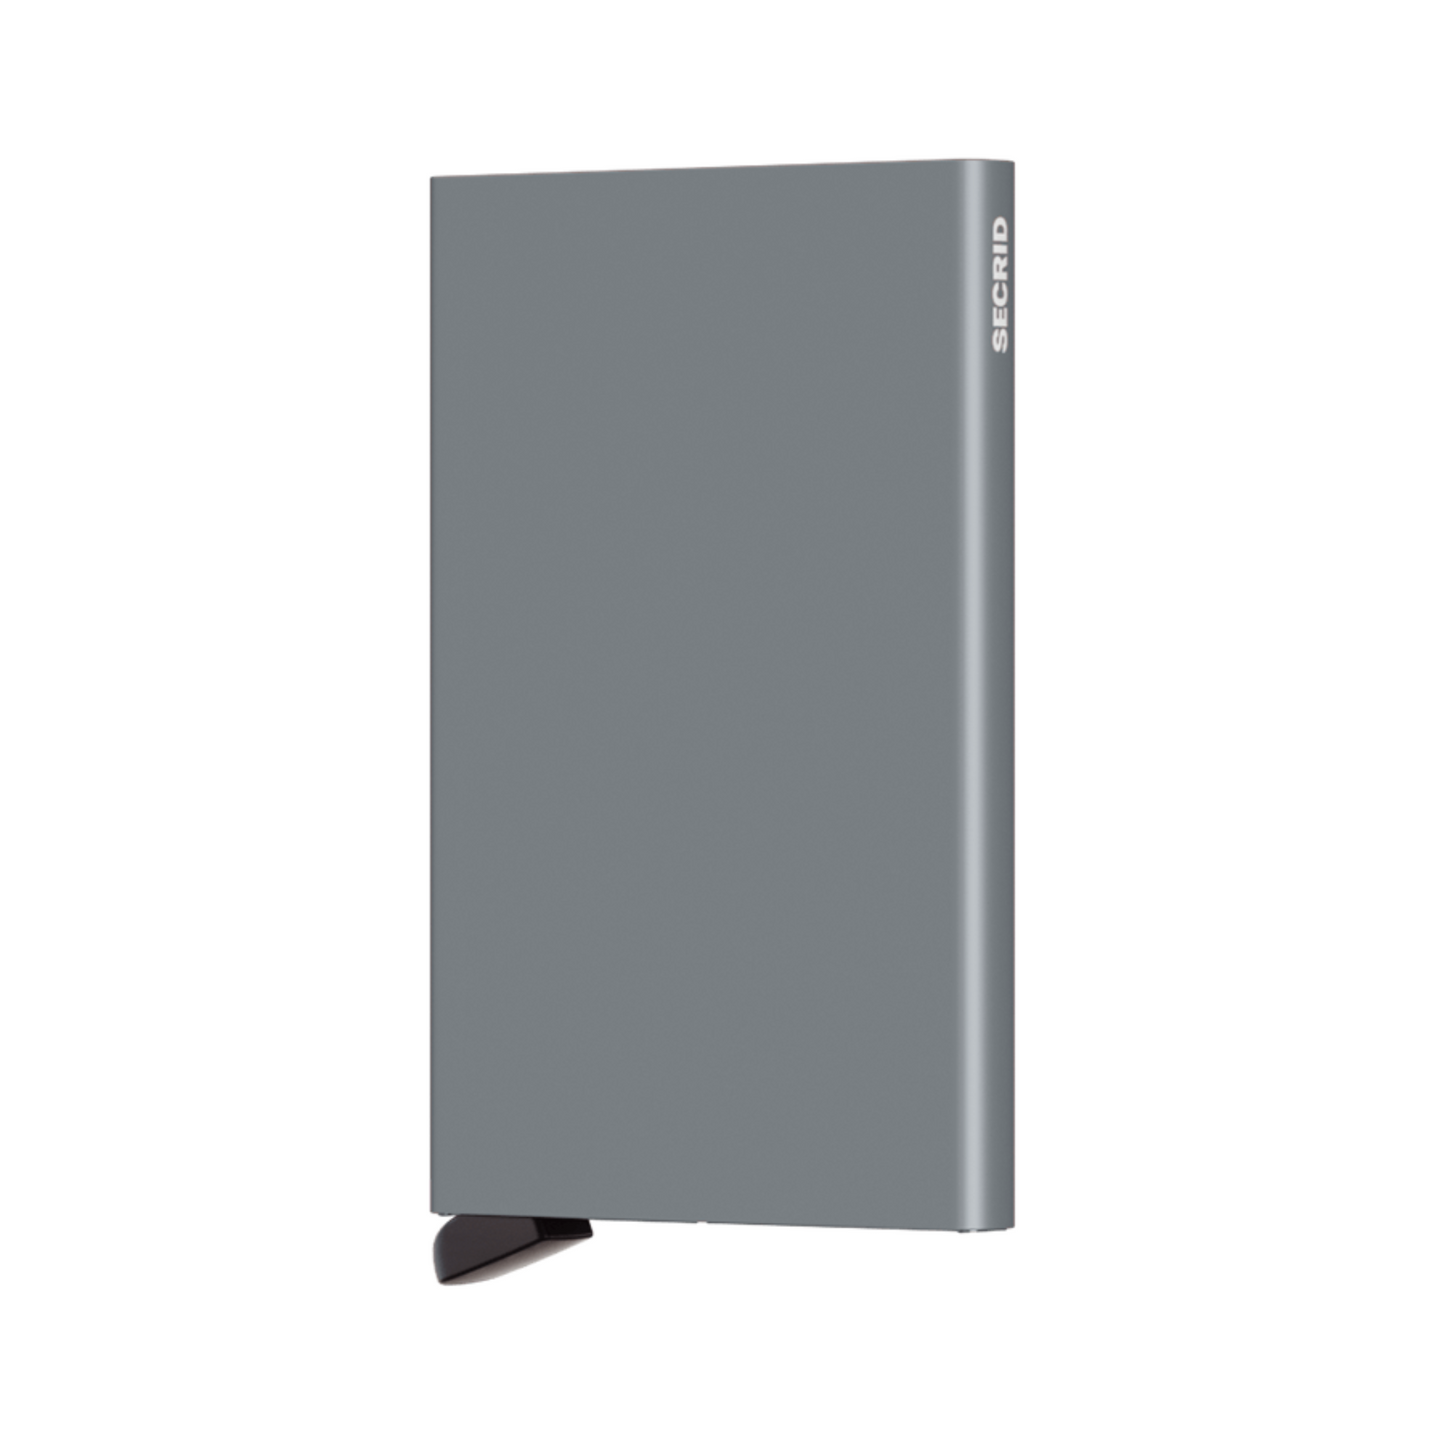 Metallic silver grey rectangular wallet with black bottom tab and small white logo on side.